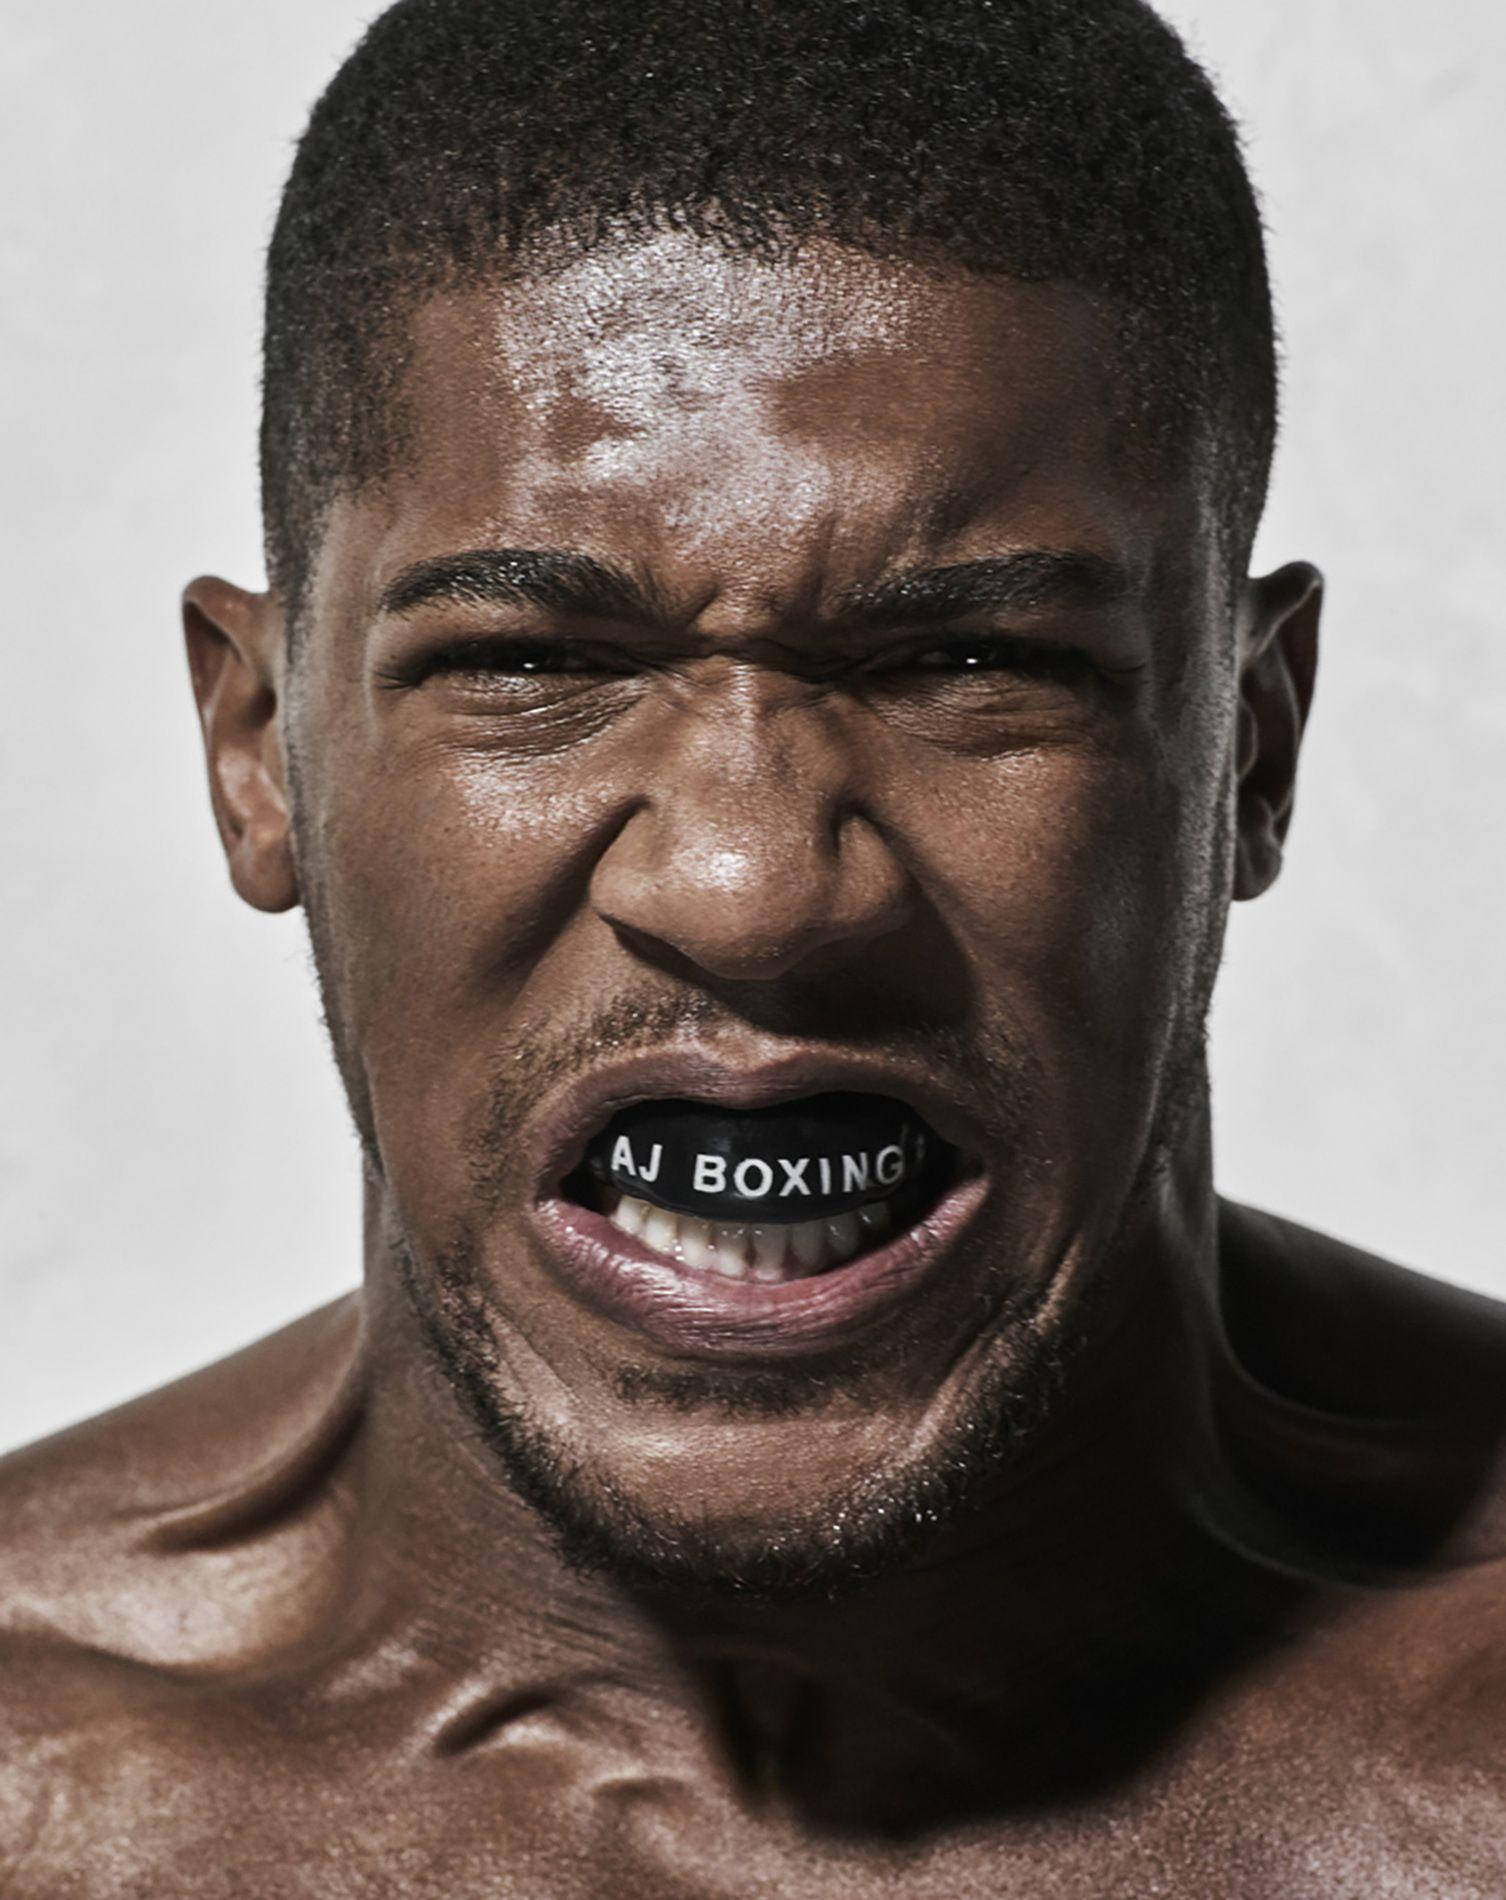 Anthonyjoshua Aj Boxningsmunskydd (this Translation Is Specific To A Potential Wallpaper Design Featuring Anthony Joshua Wearing His Boxing Mouthguard) Wallpaper